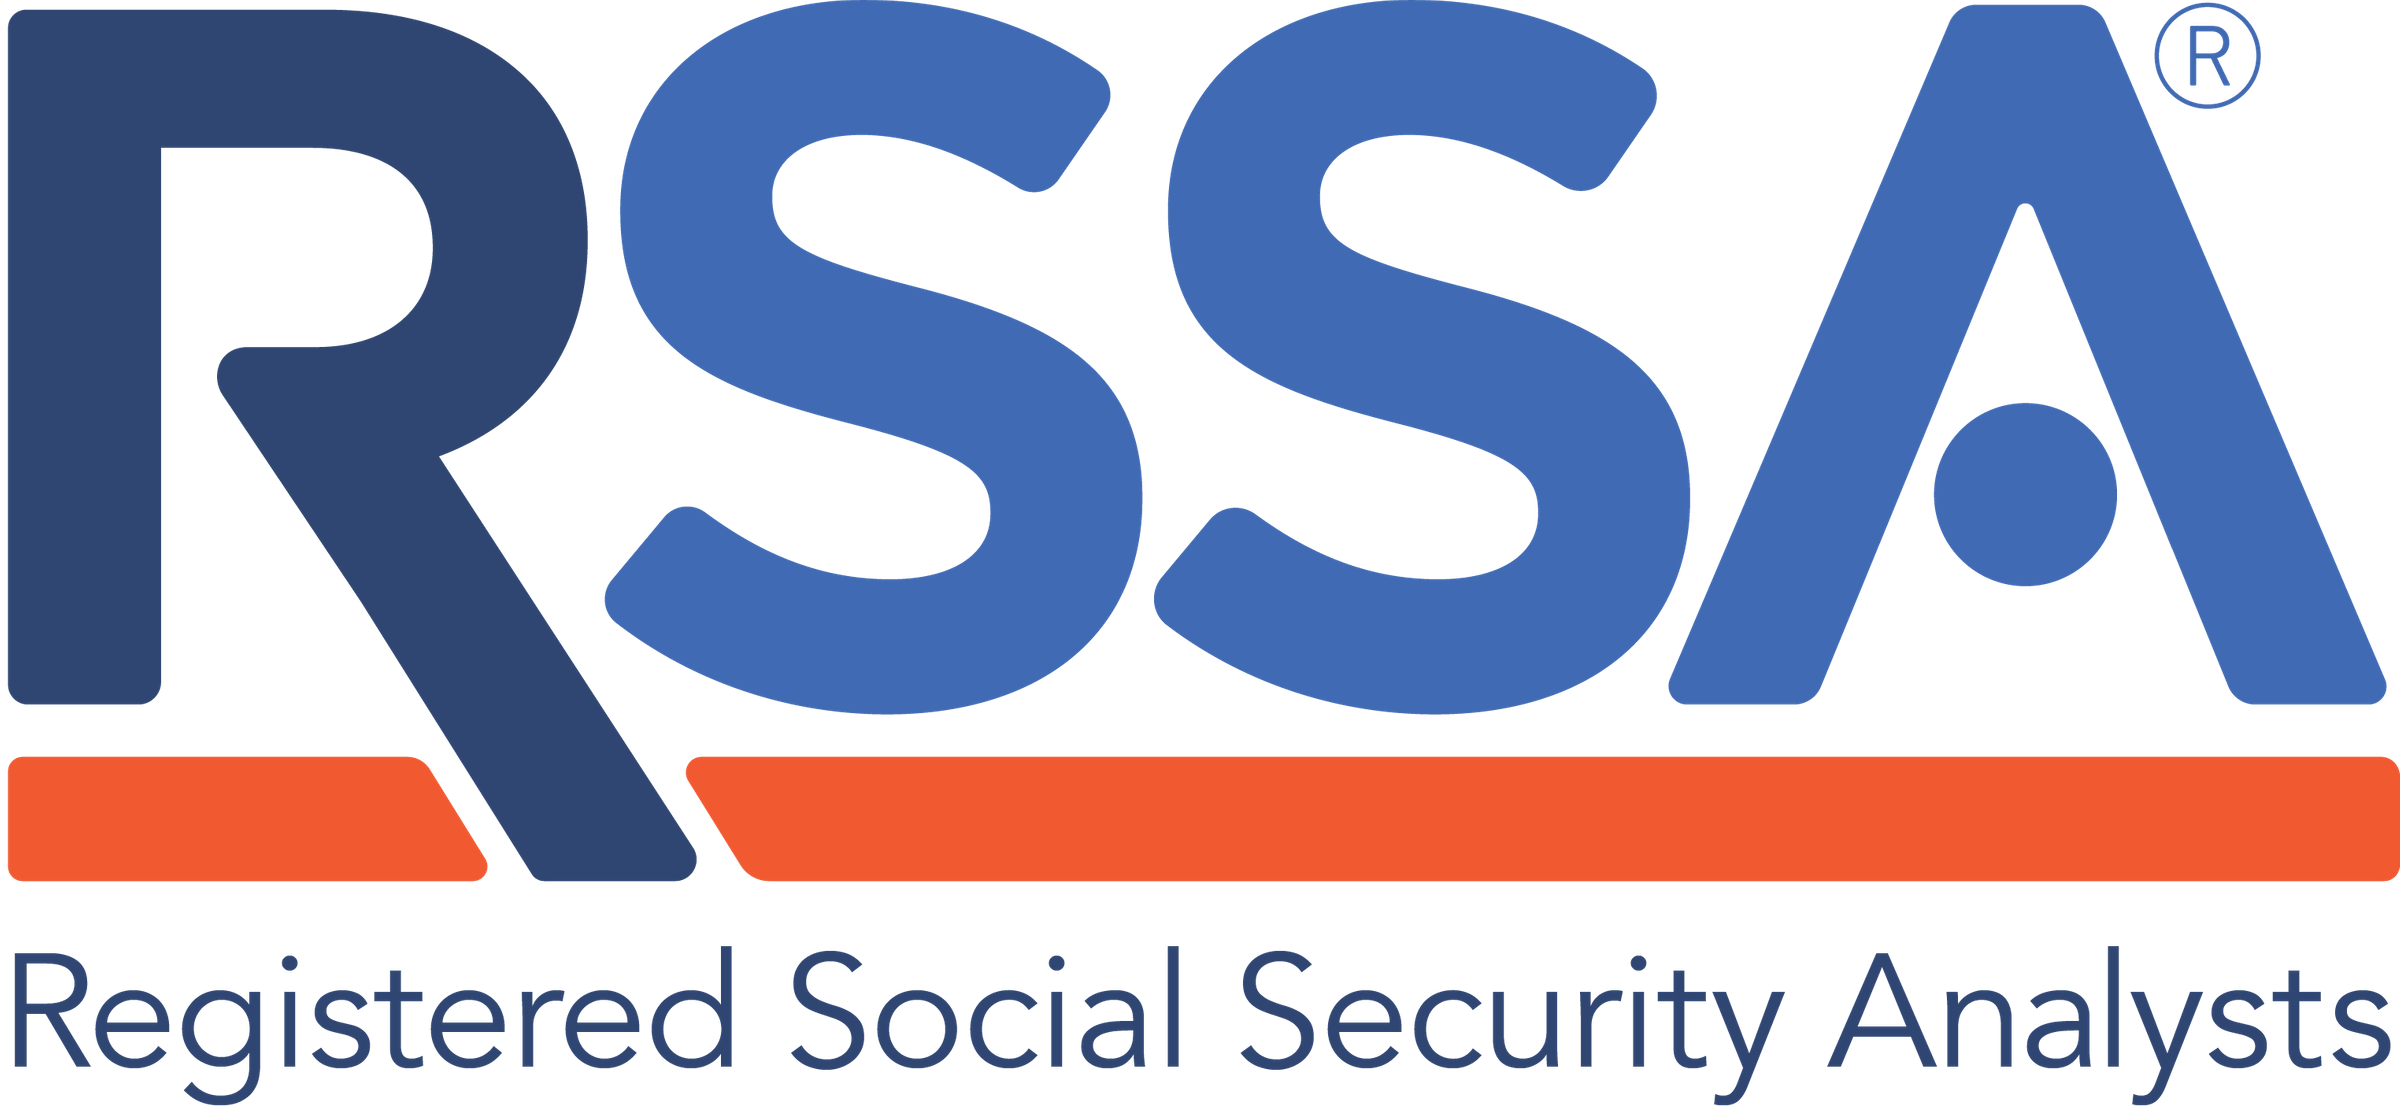 a. RSSA_Logo_Analysts(R).png